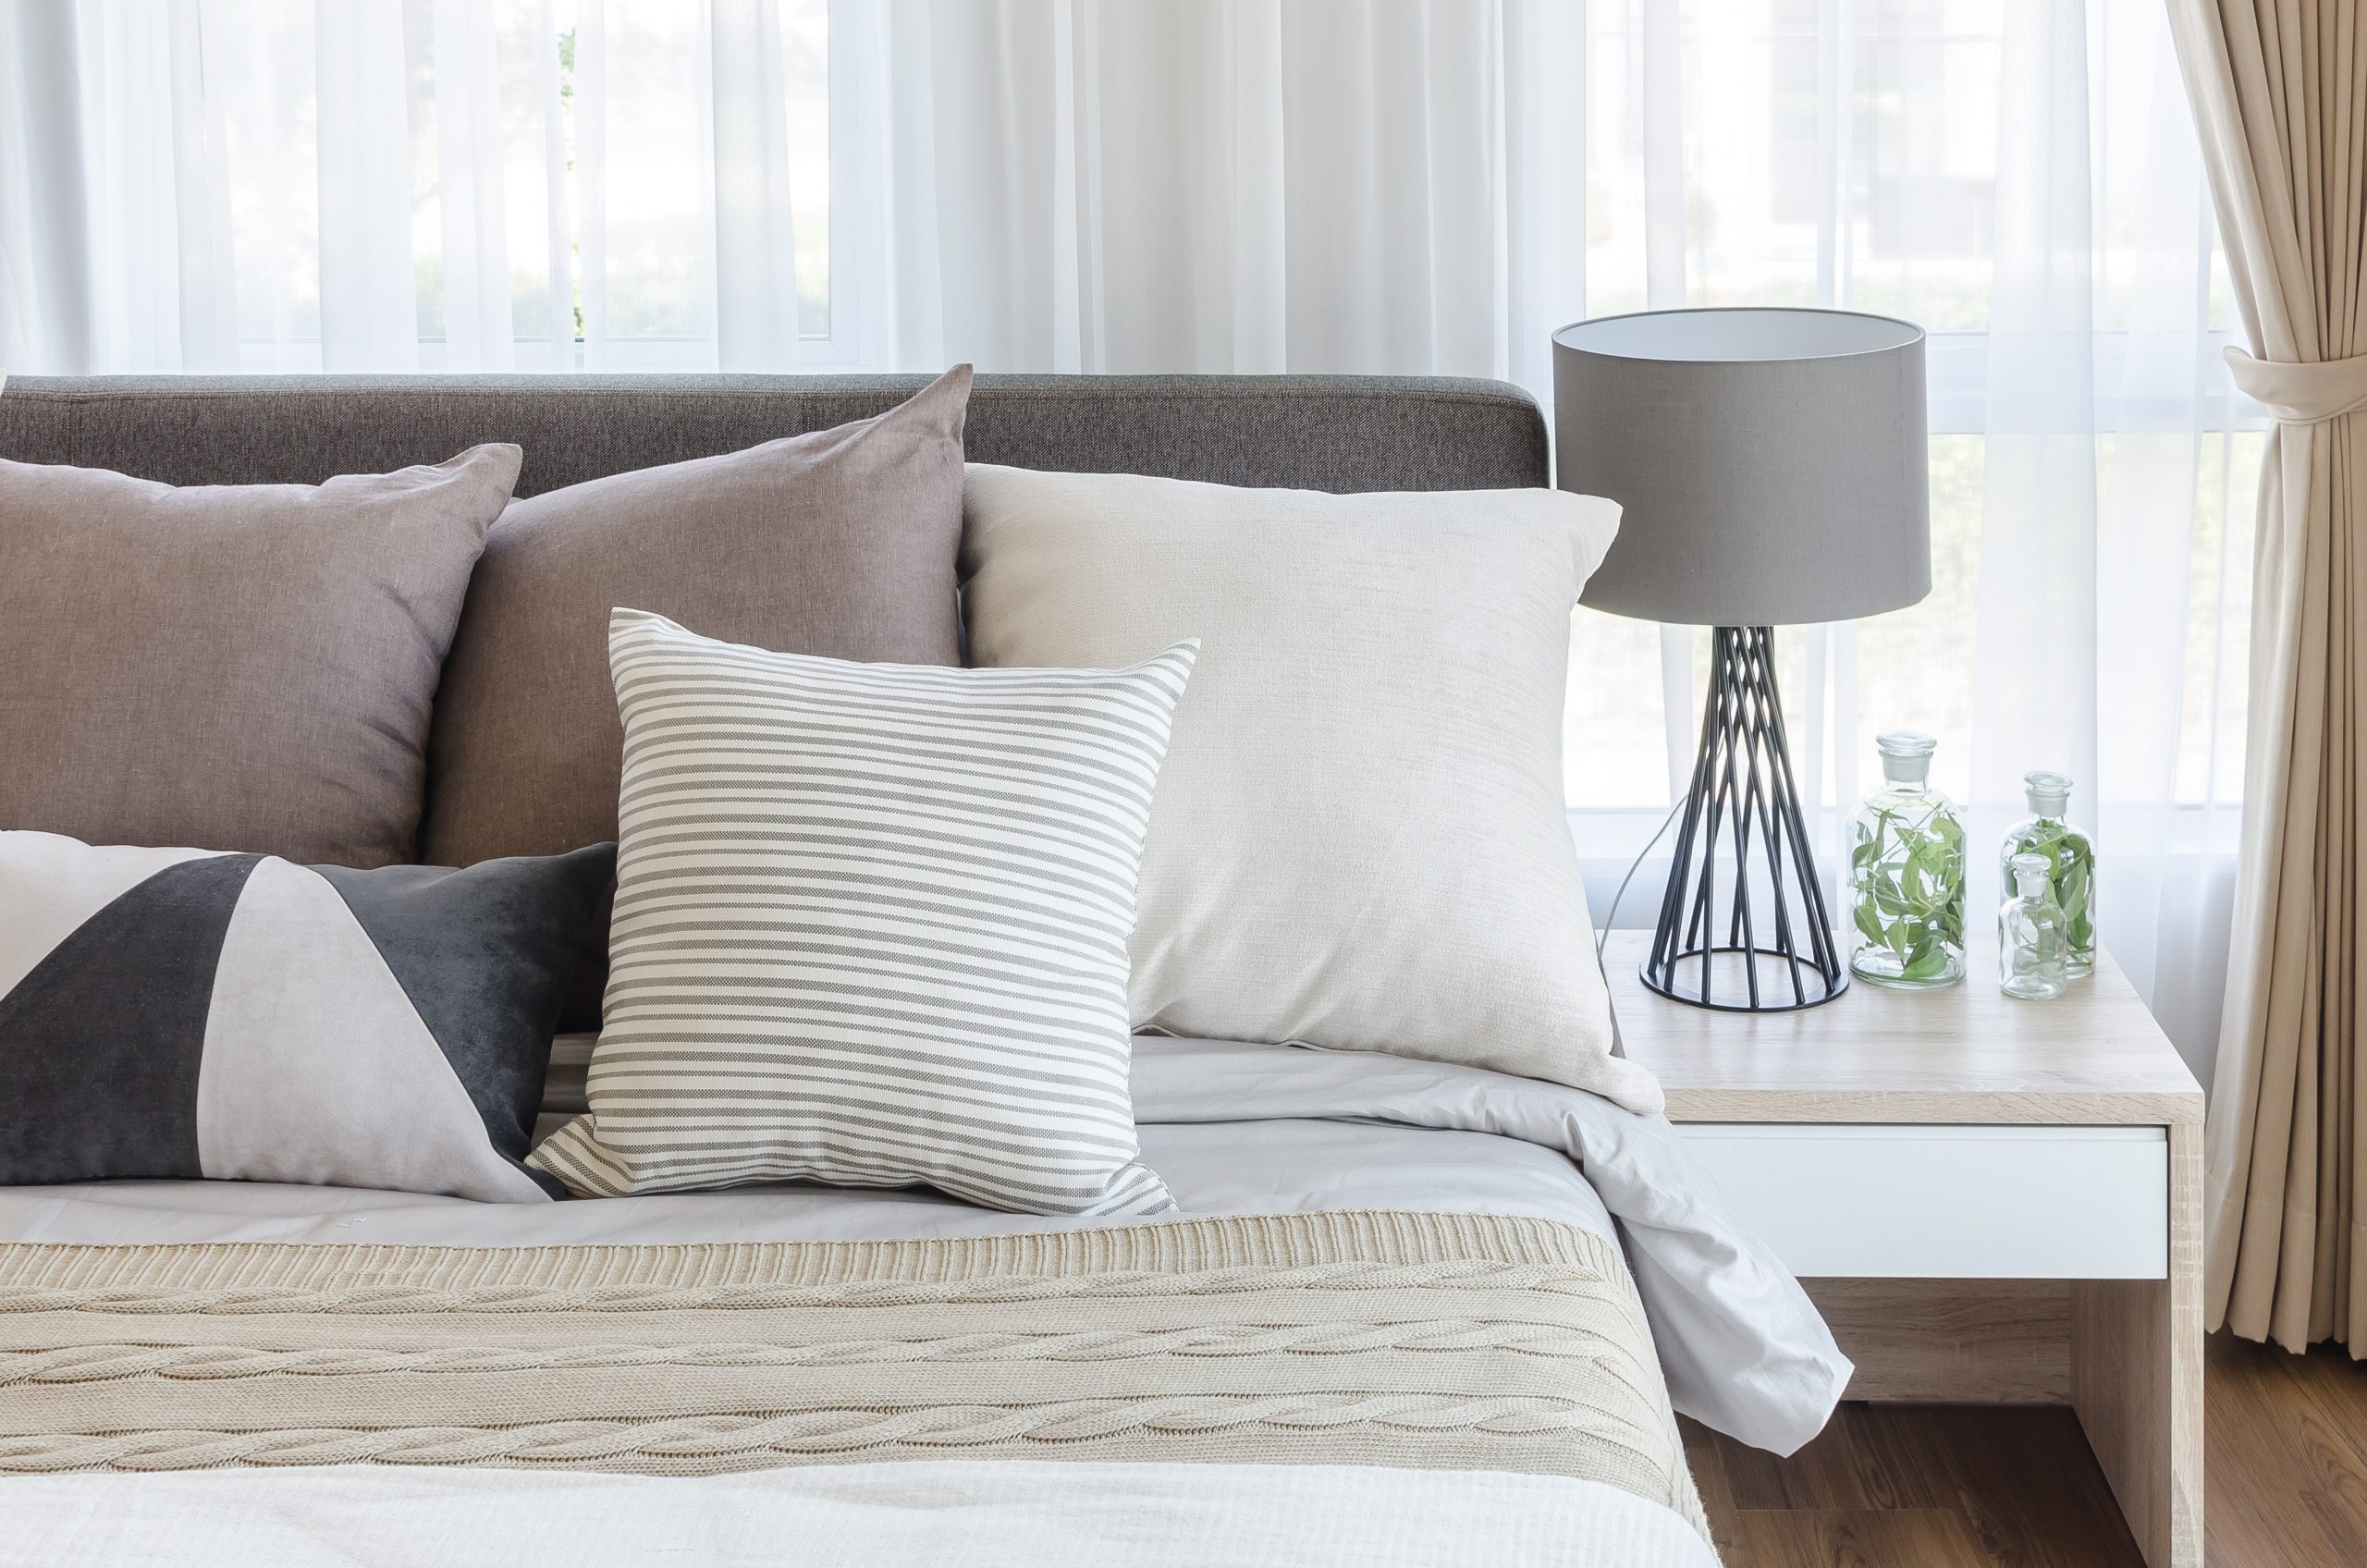 12 Common Bedroom Items that Are Secretly Toxic